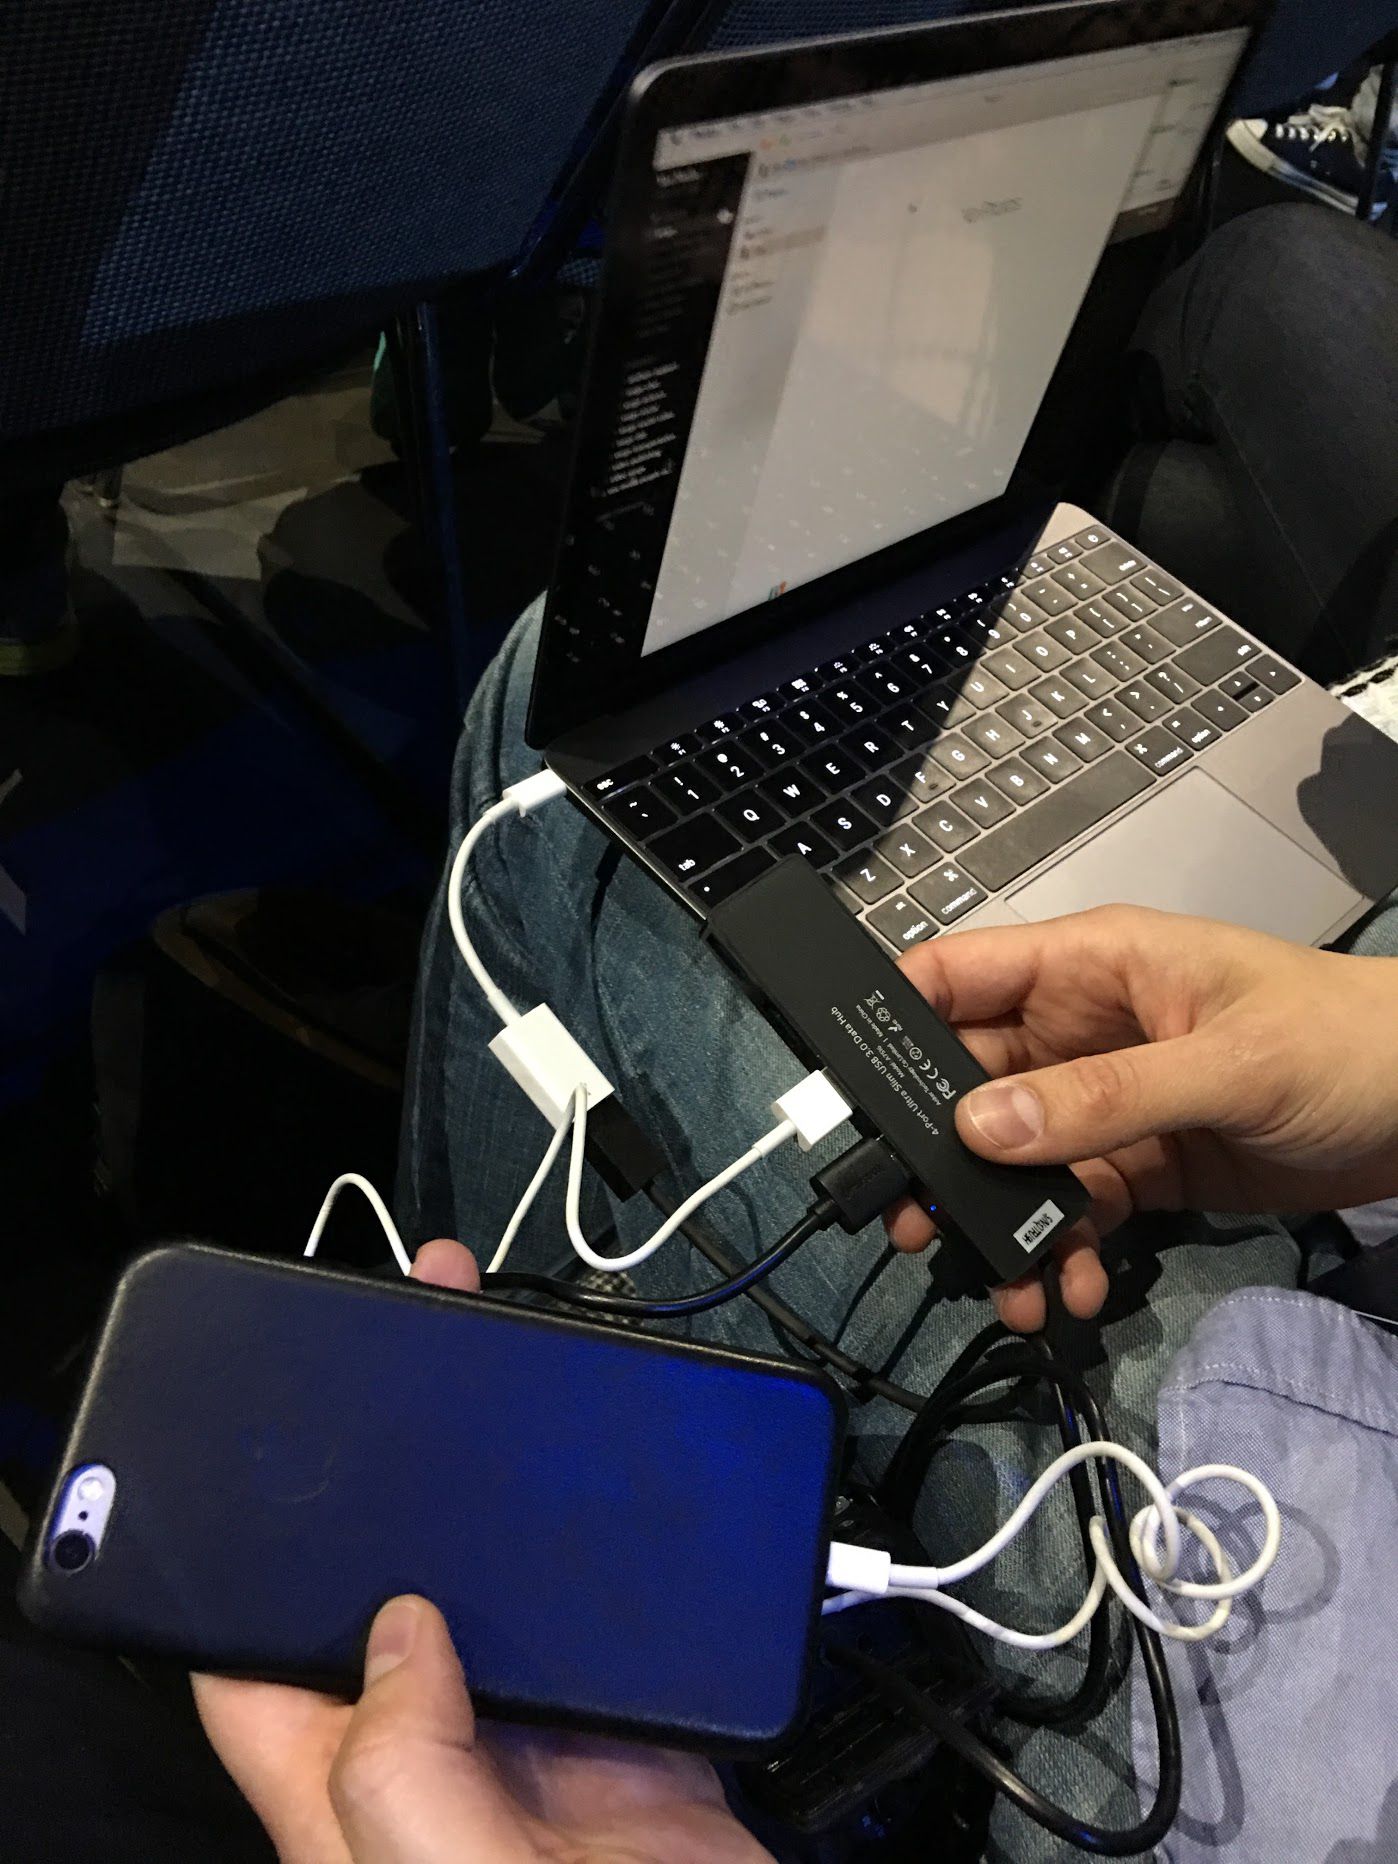 macbook with a bunch of dongles